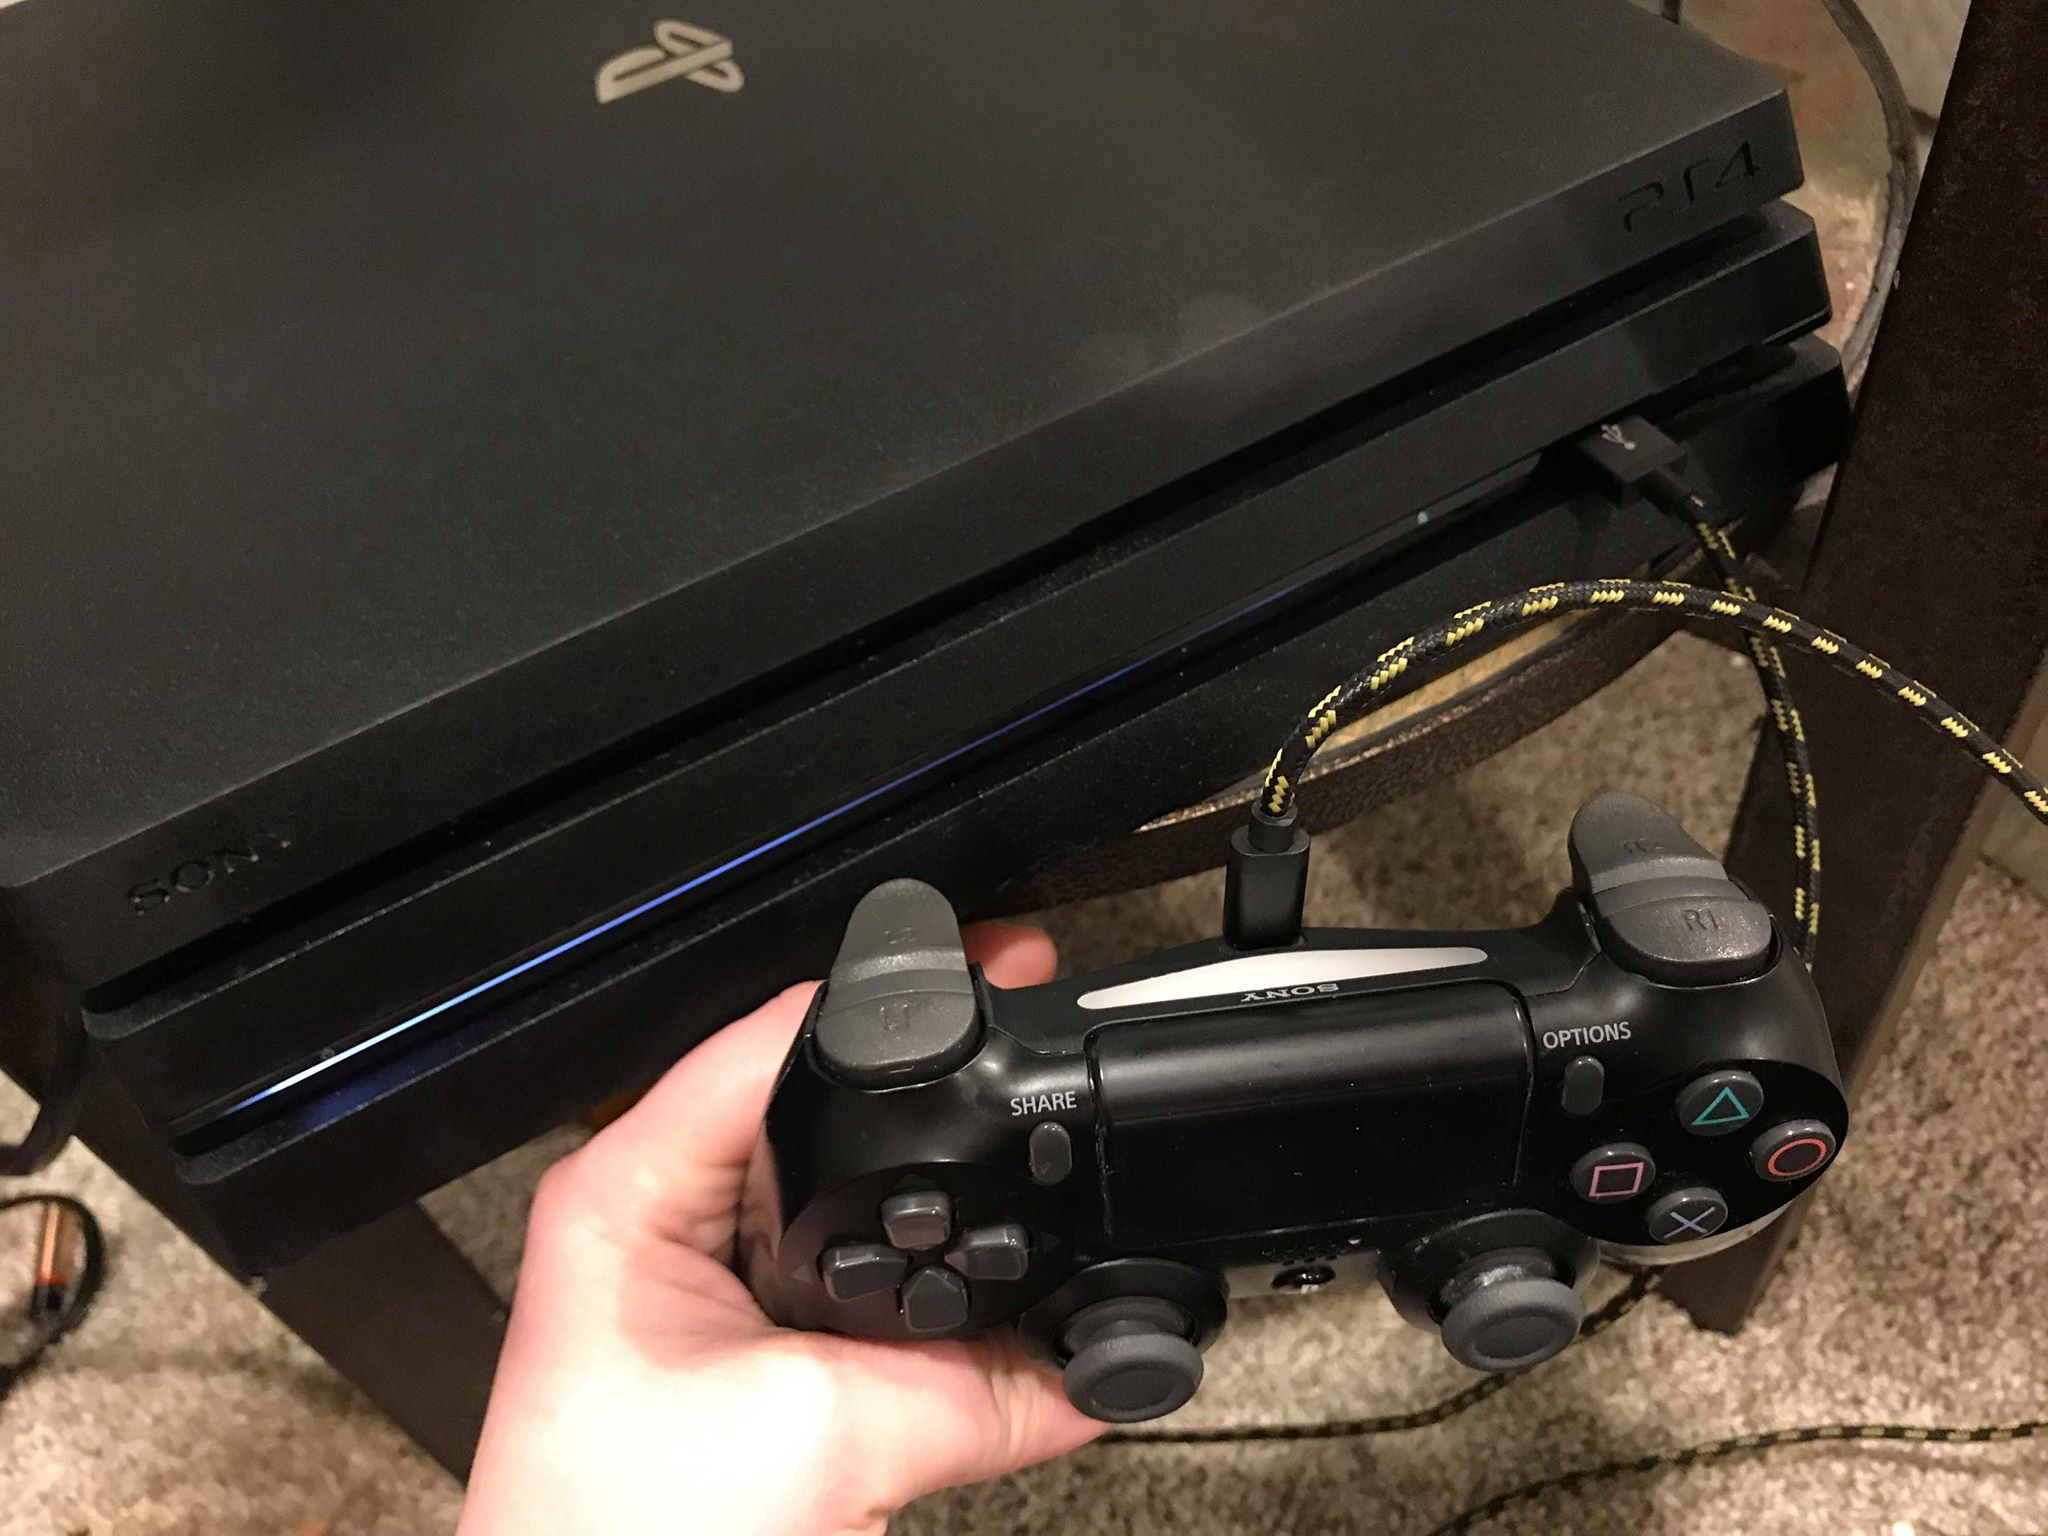 PS4 Controller Plugged into PS4